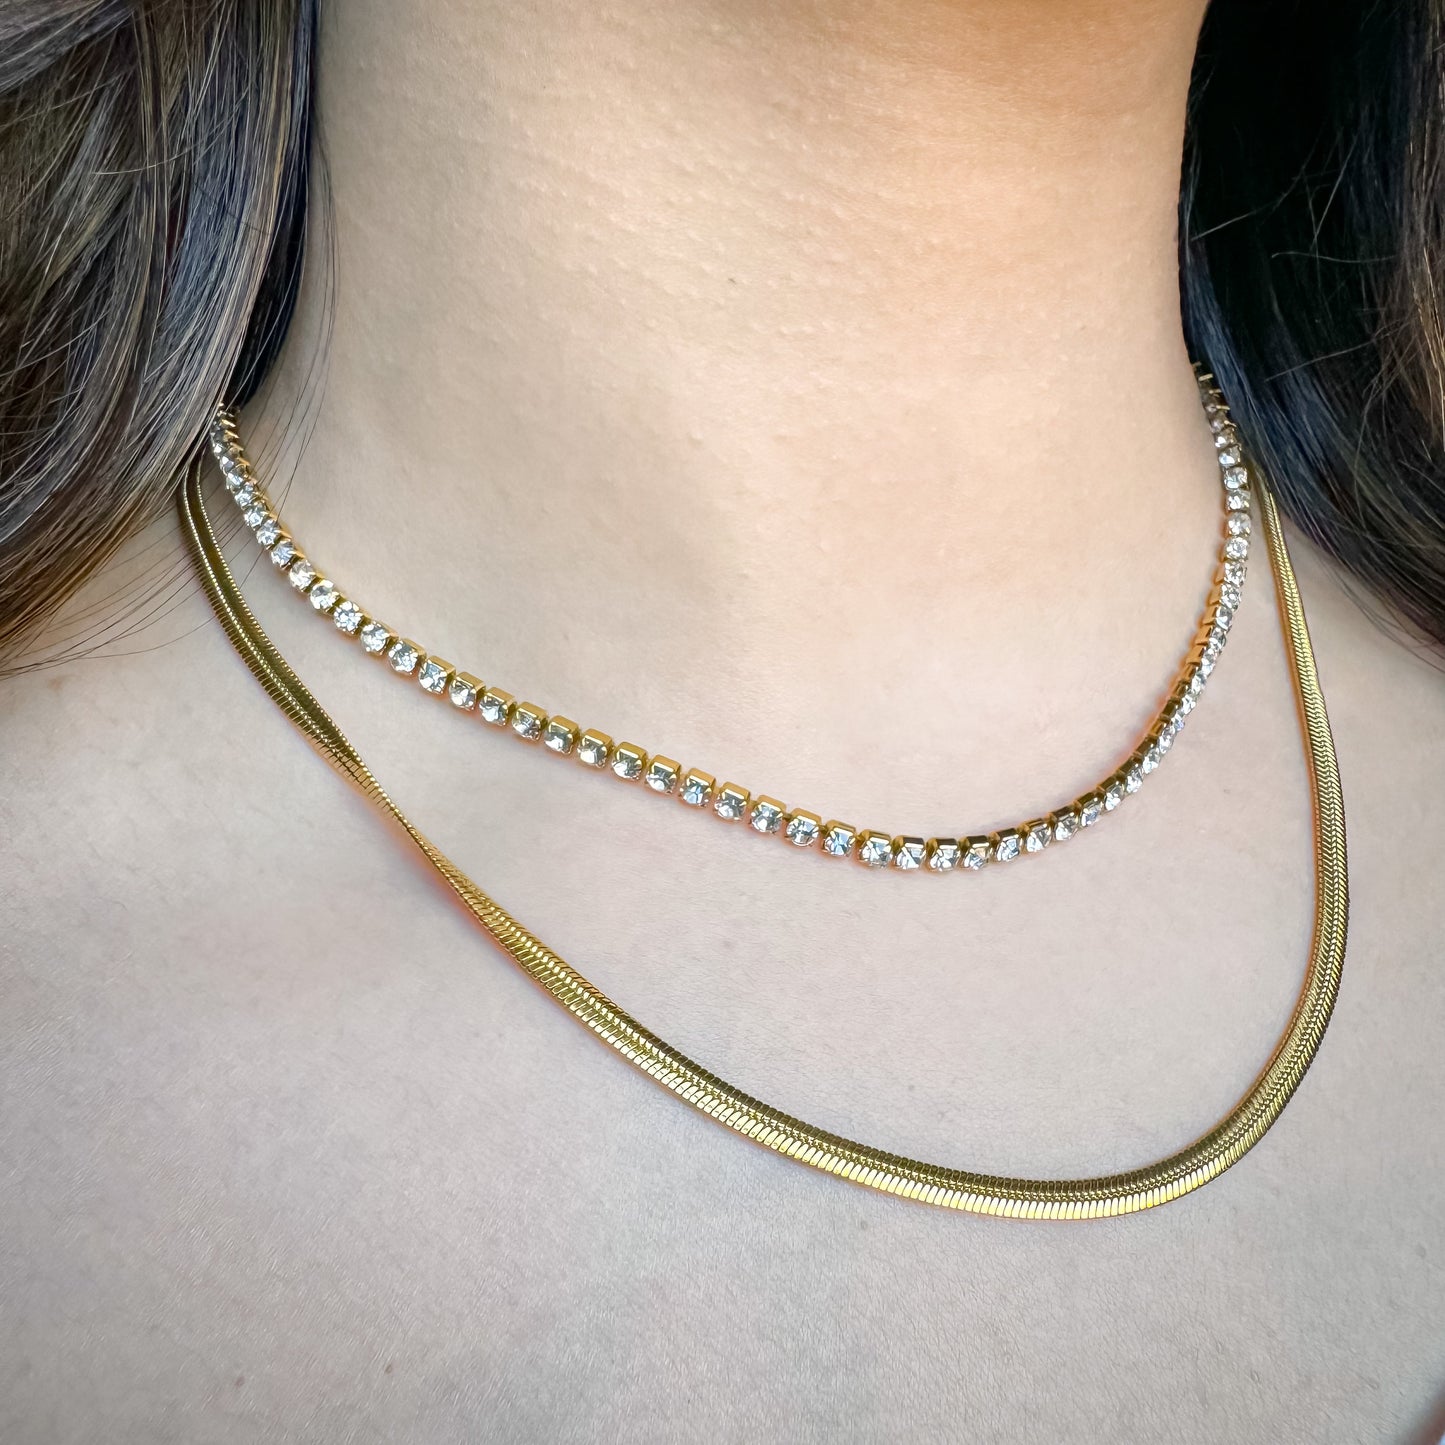 Tennis & Herringbone Chain Necklace-Find the perfect Tennis & Herringbone Chain Necklace online. Discover stylish accessories designed to elevate her look. Shop now for the latest trends and styles! Visit now⚡-Dazzledvenus